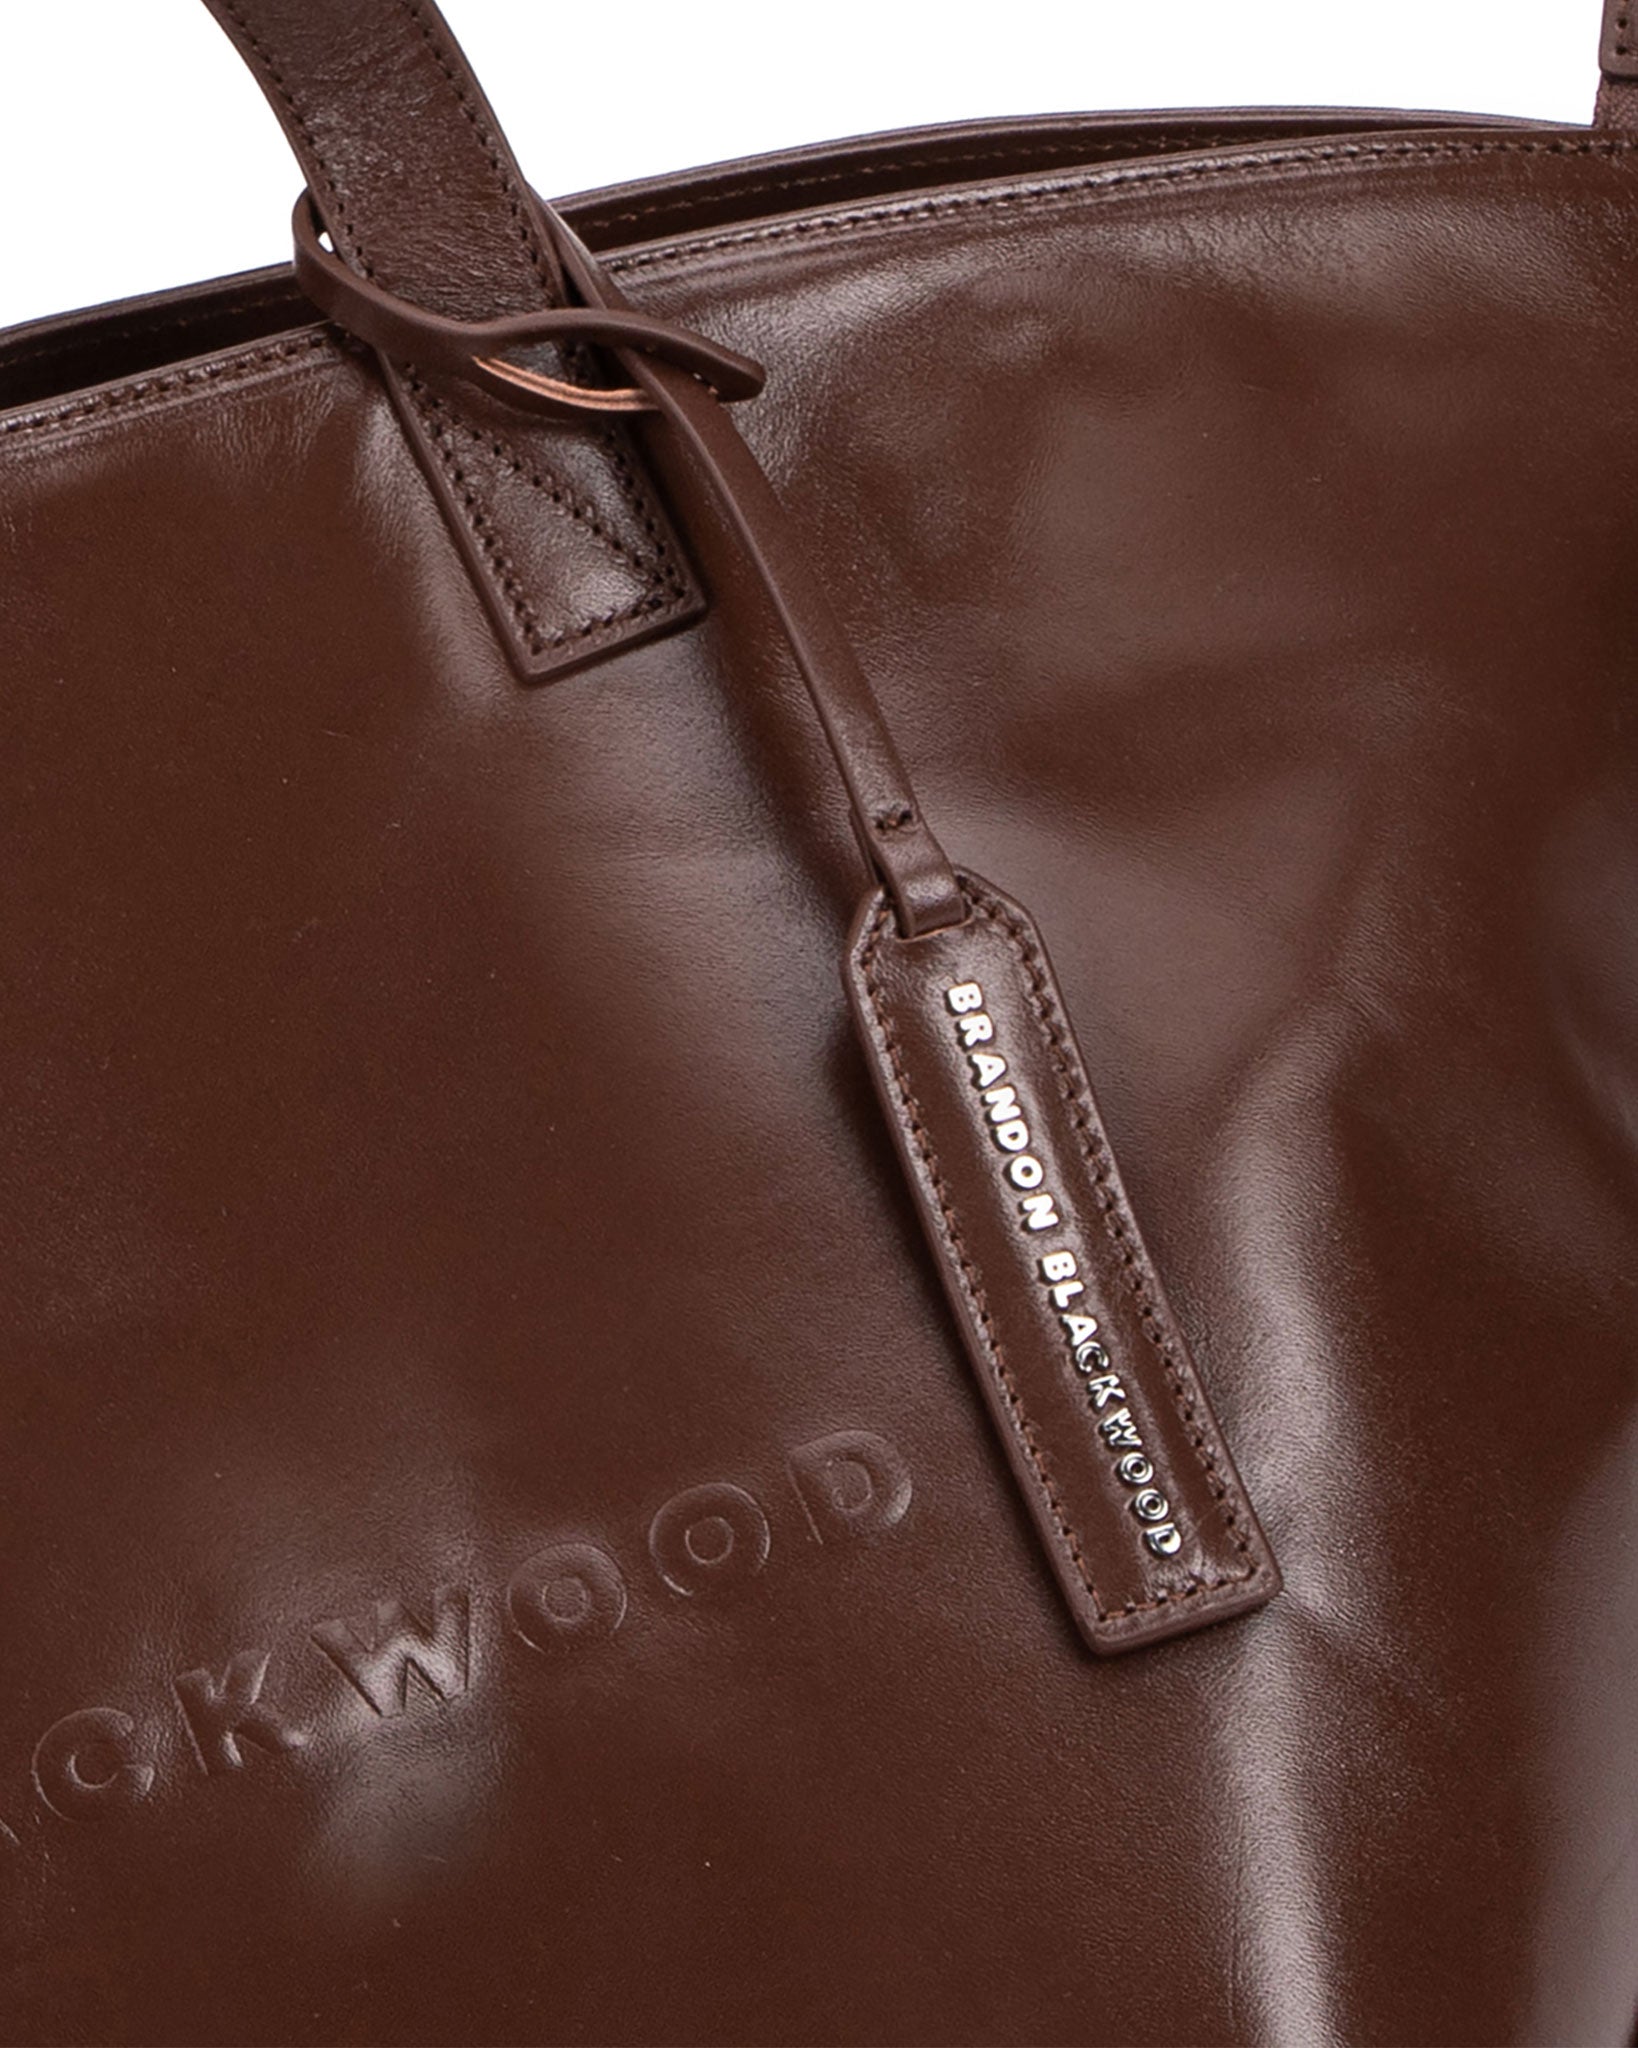 Shopping E W Leather Tote Bag in Brown - Saint Laurent